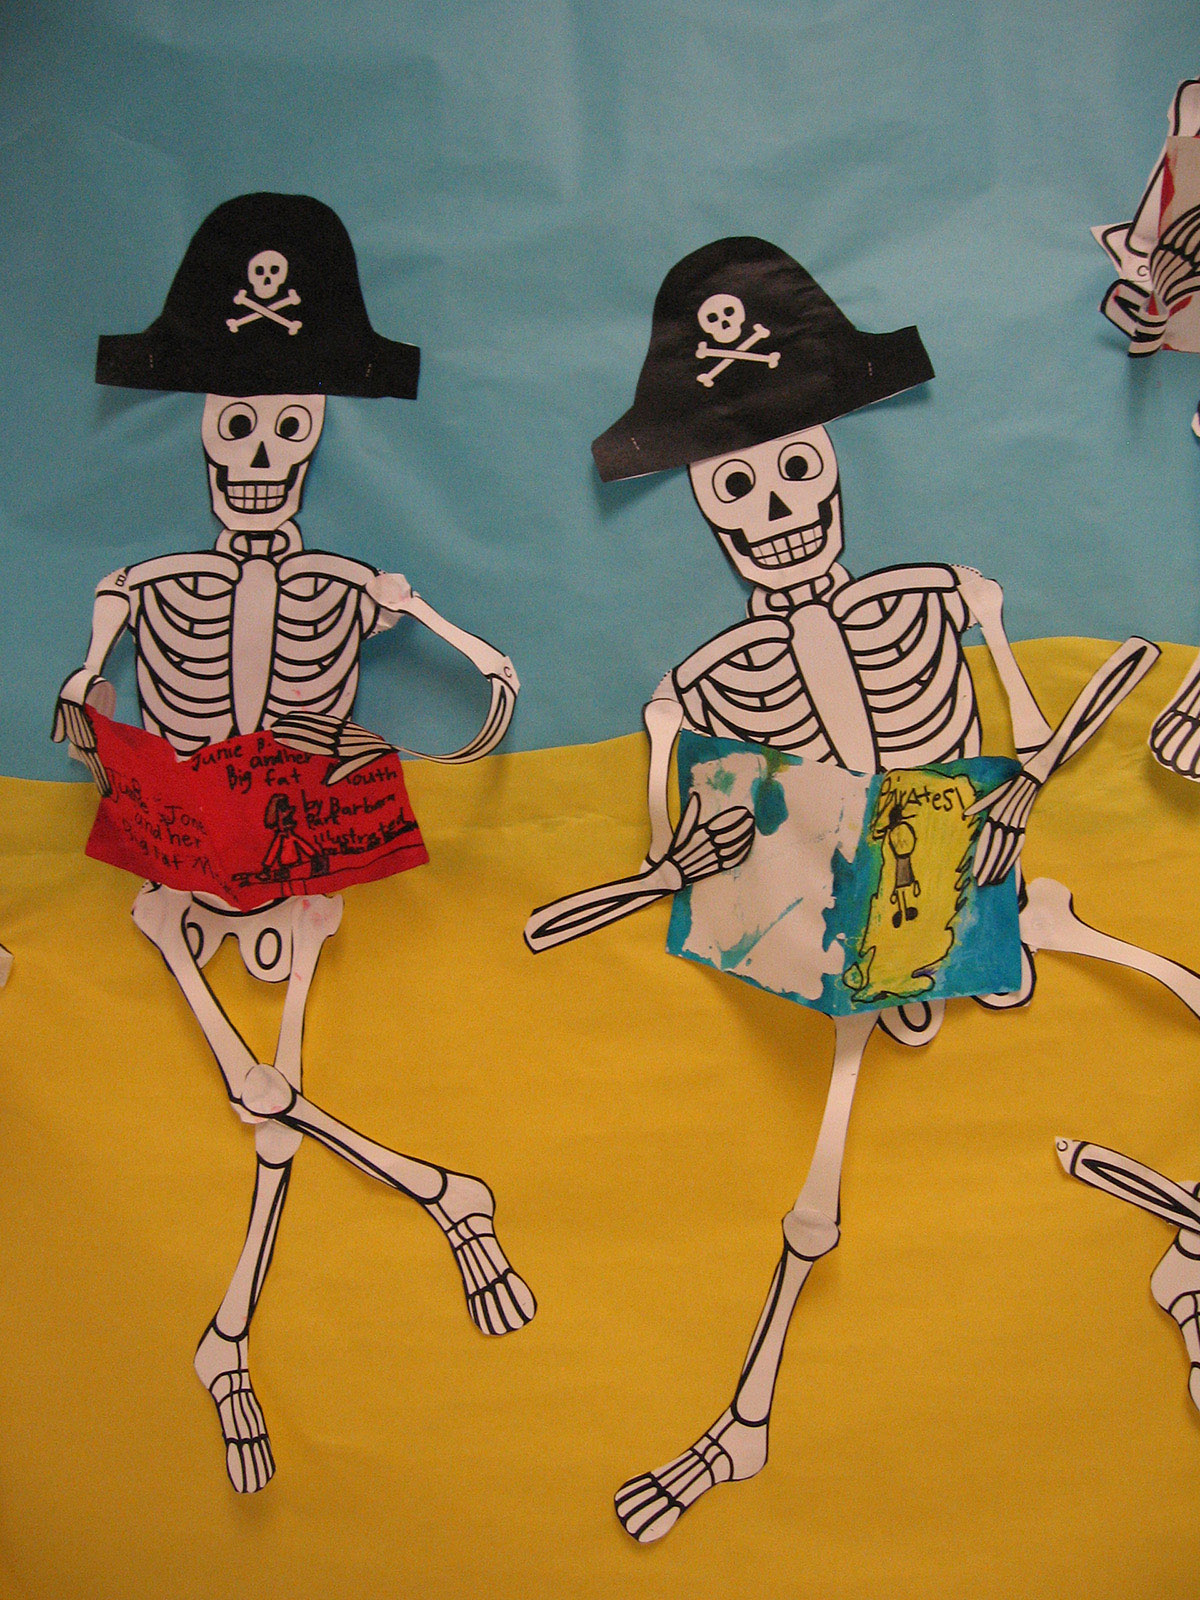 Pirate Skeletons Like To Read